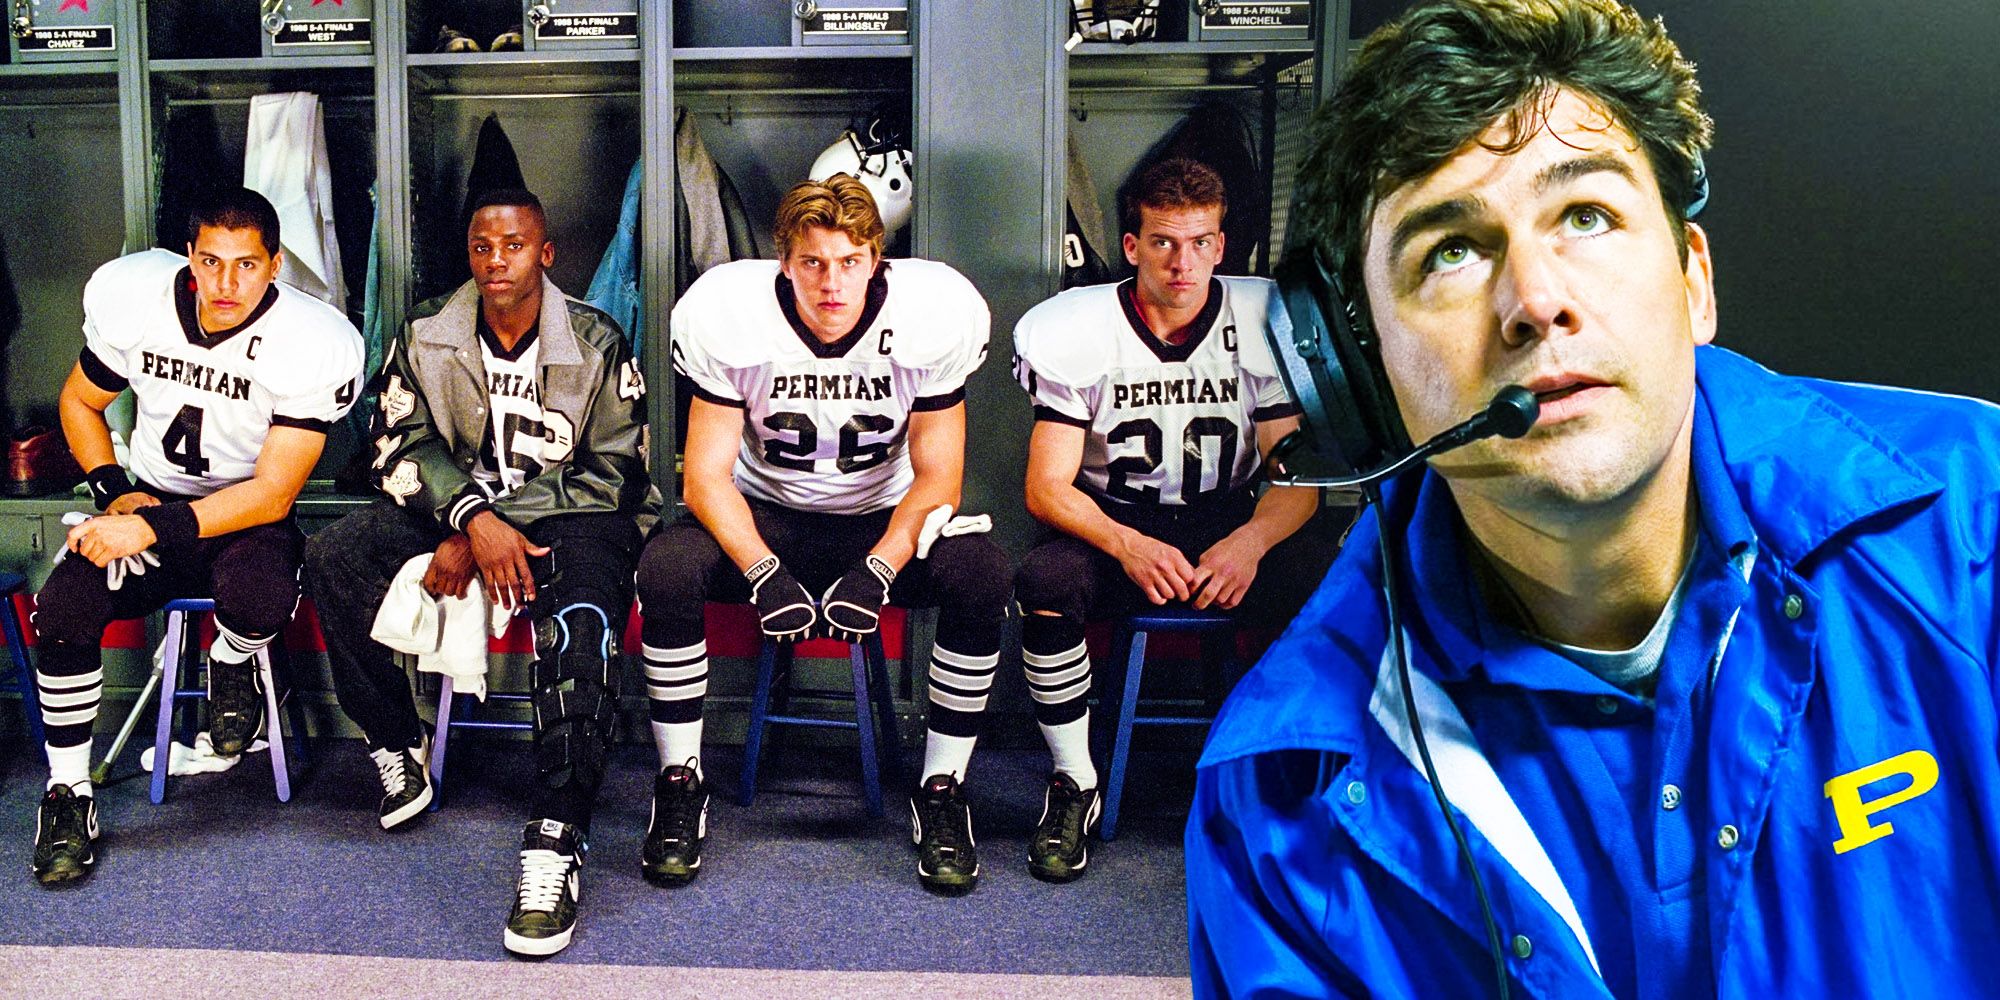 Friday night lights show and movie reboot